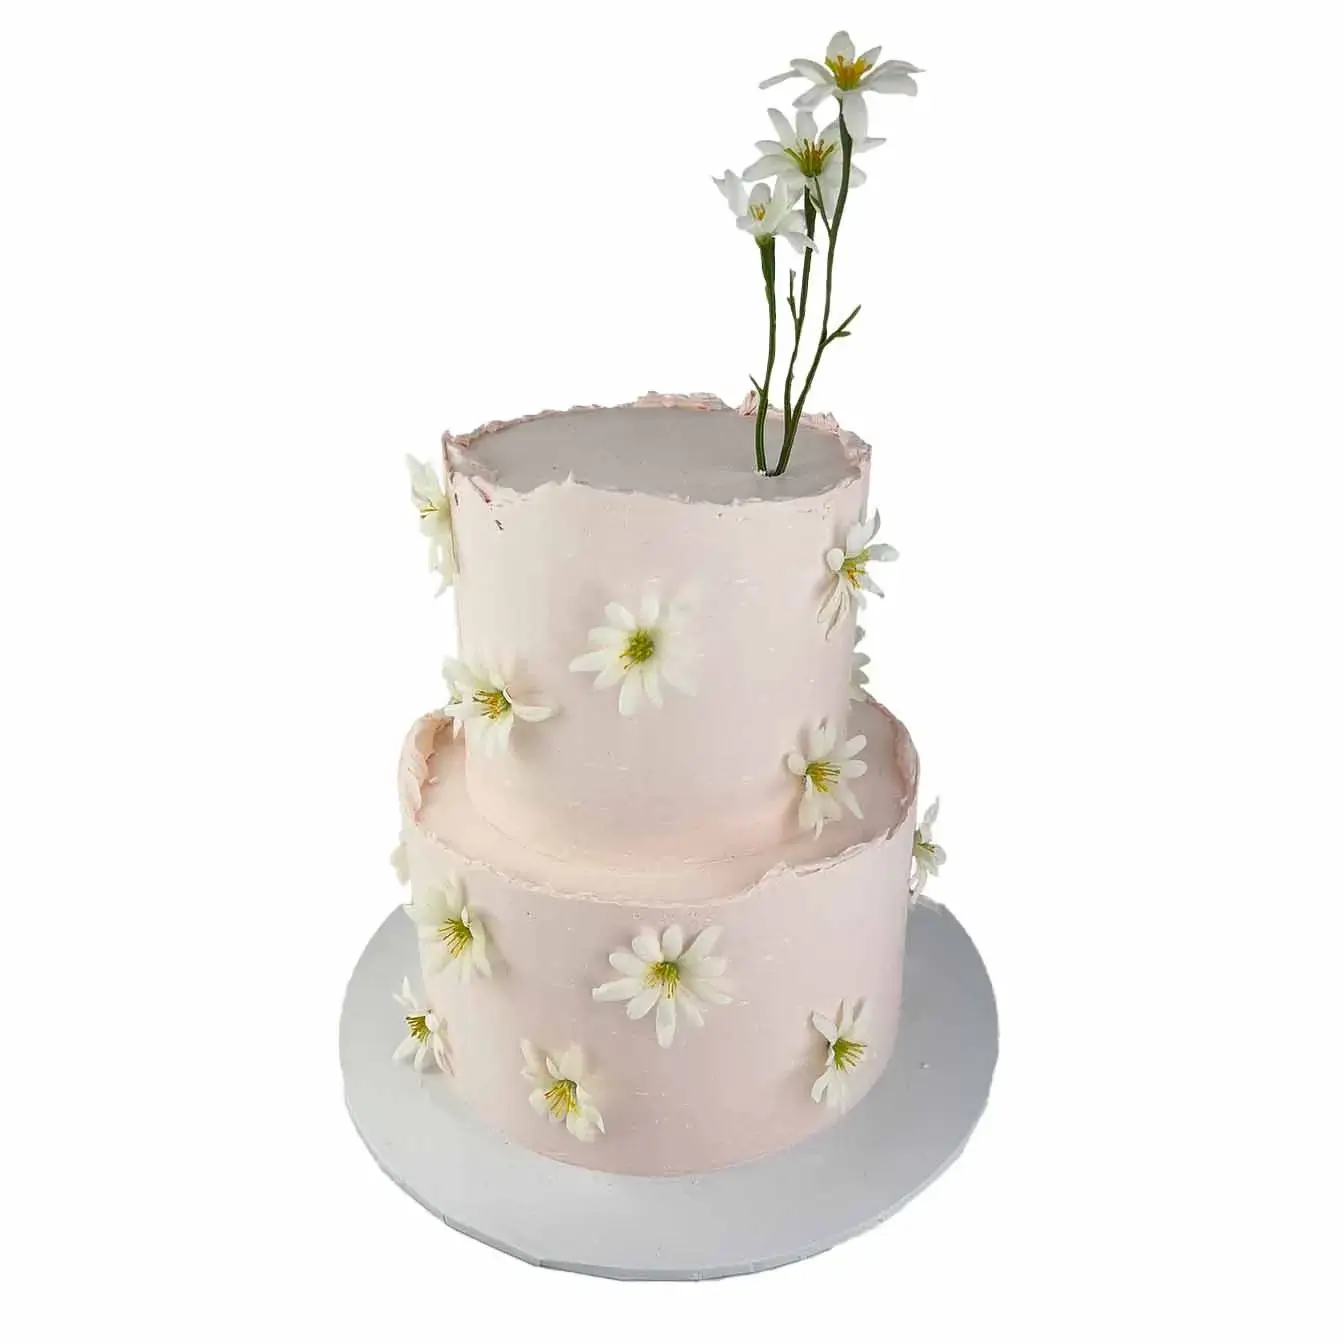 Pink Daisy Delight Cake - A two-tier pink cake adorned with scattered daisies, a charming and fresh centerpiece celebrating the beauty of nature.